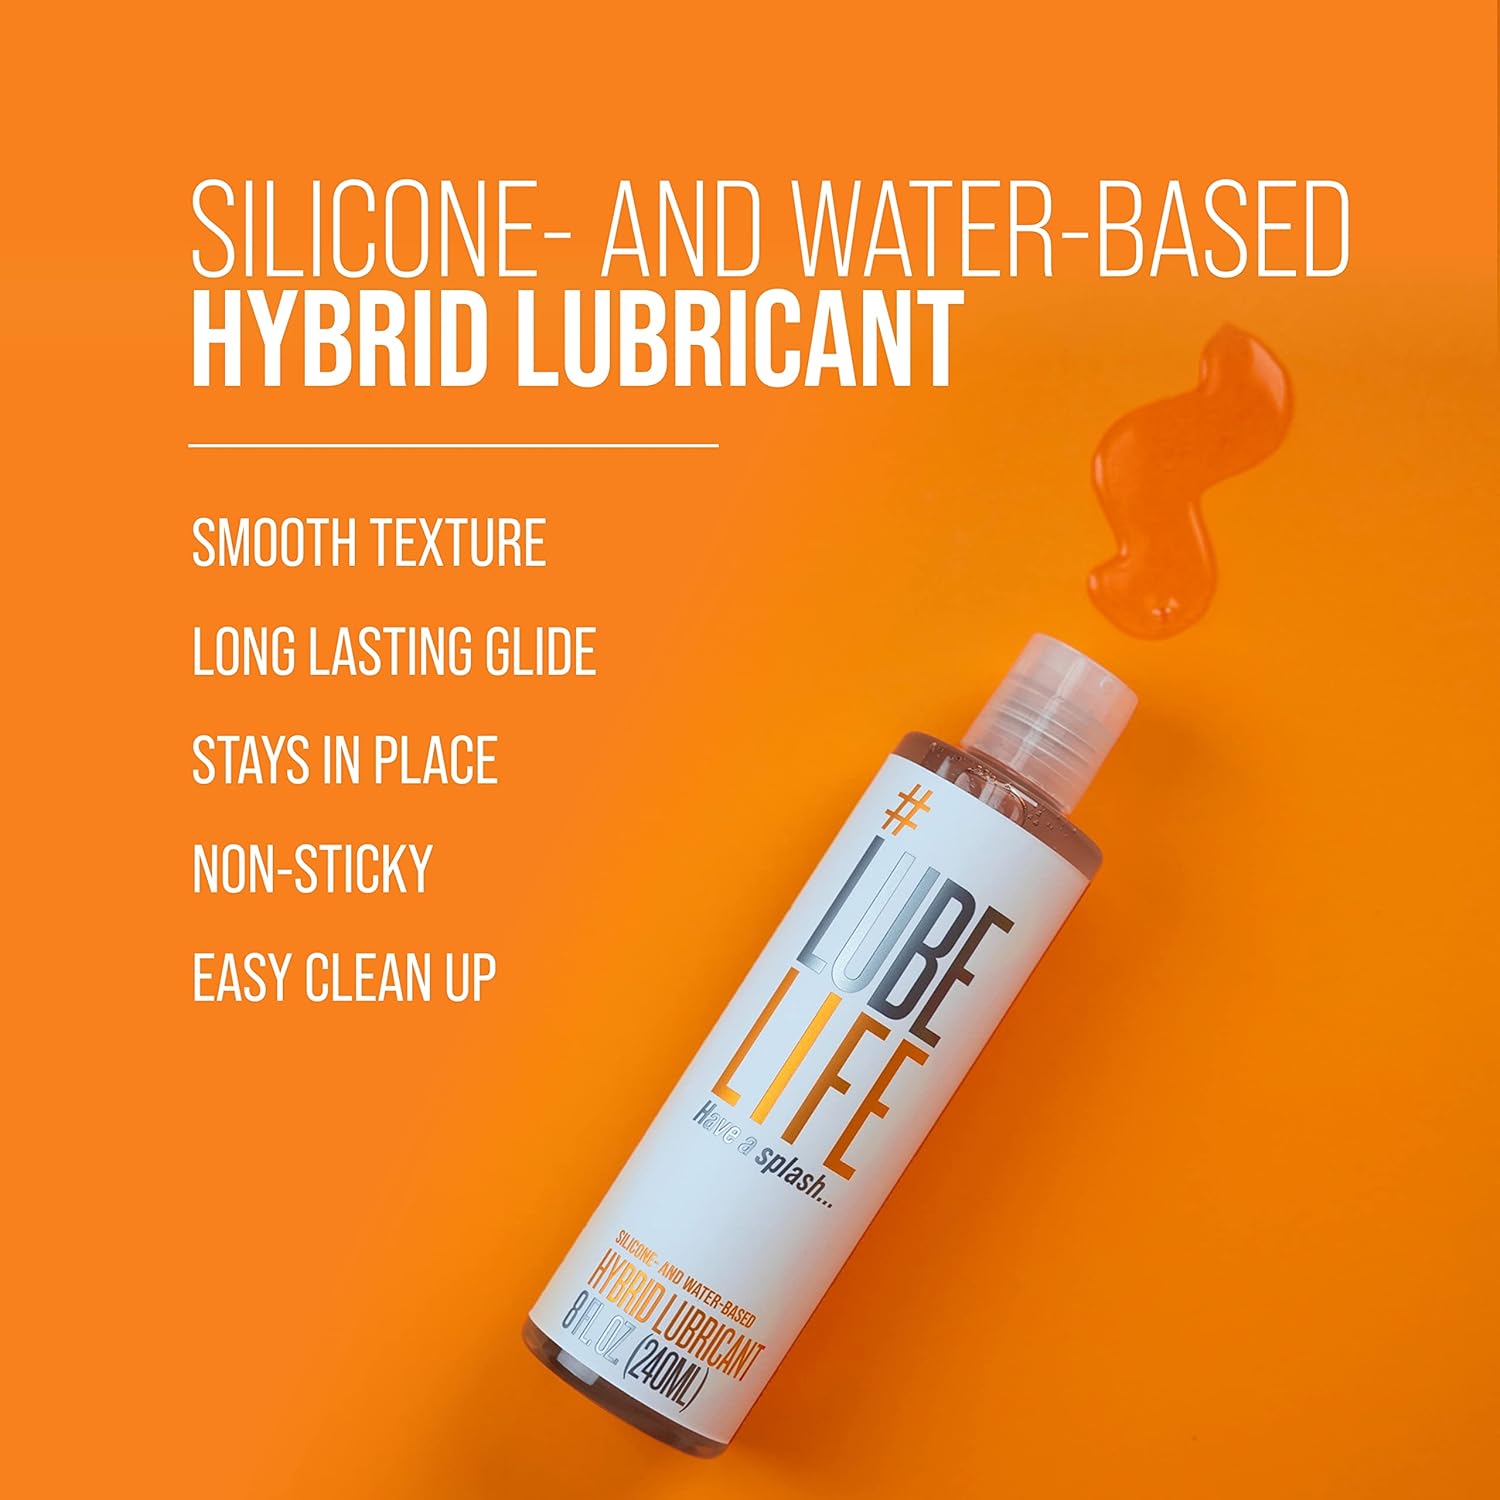 Silicone and Water-Based Hybrid Lubricant 8 Fl Oz - Sex Shop Miami